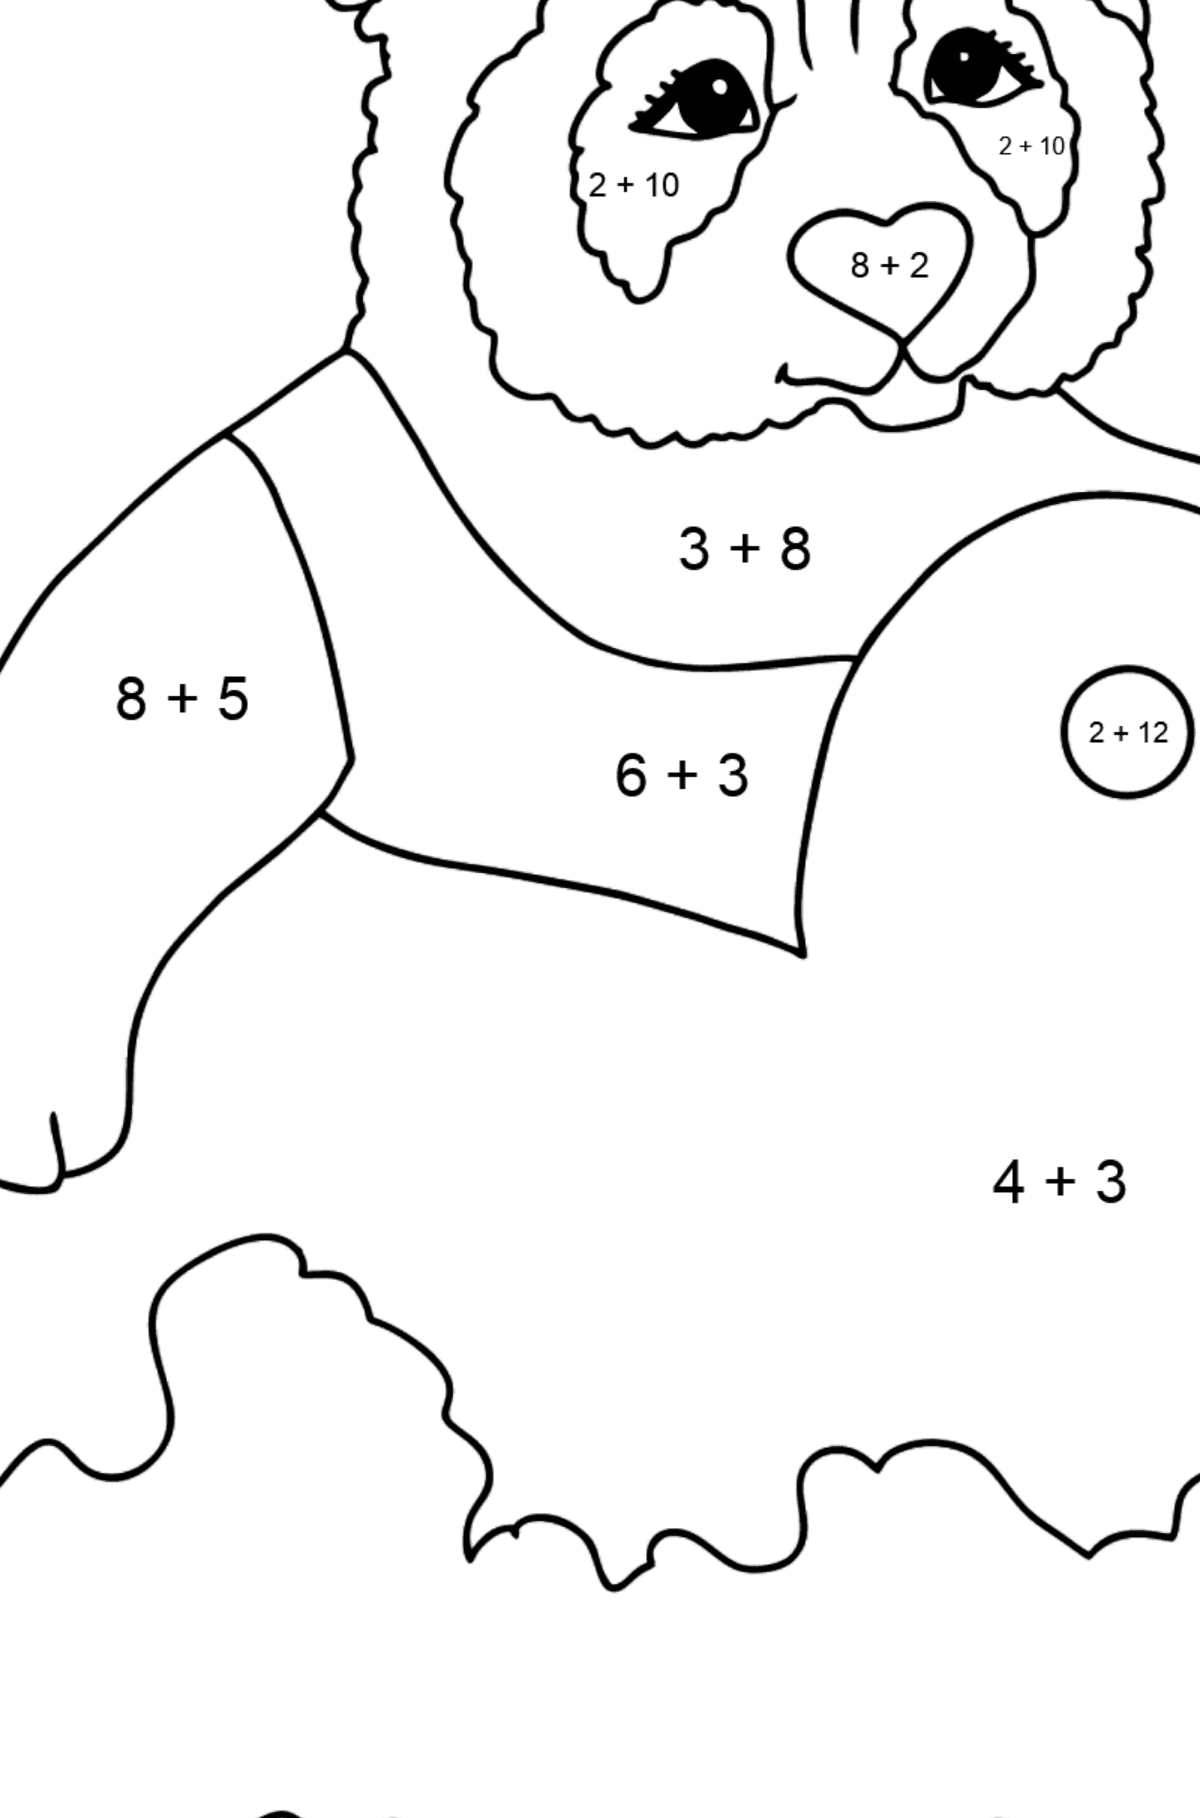 Amusing Panda coloring page - Math Coloring - Addition for Kids